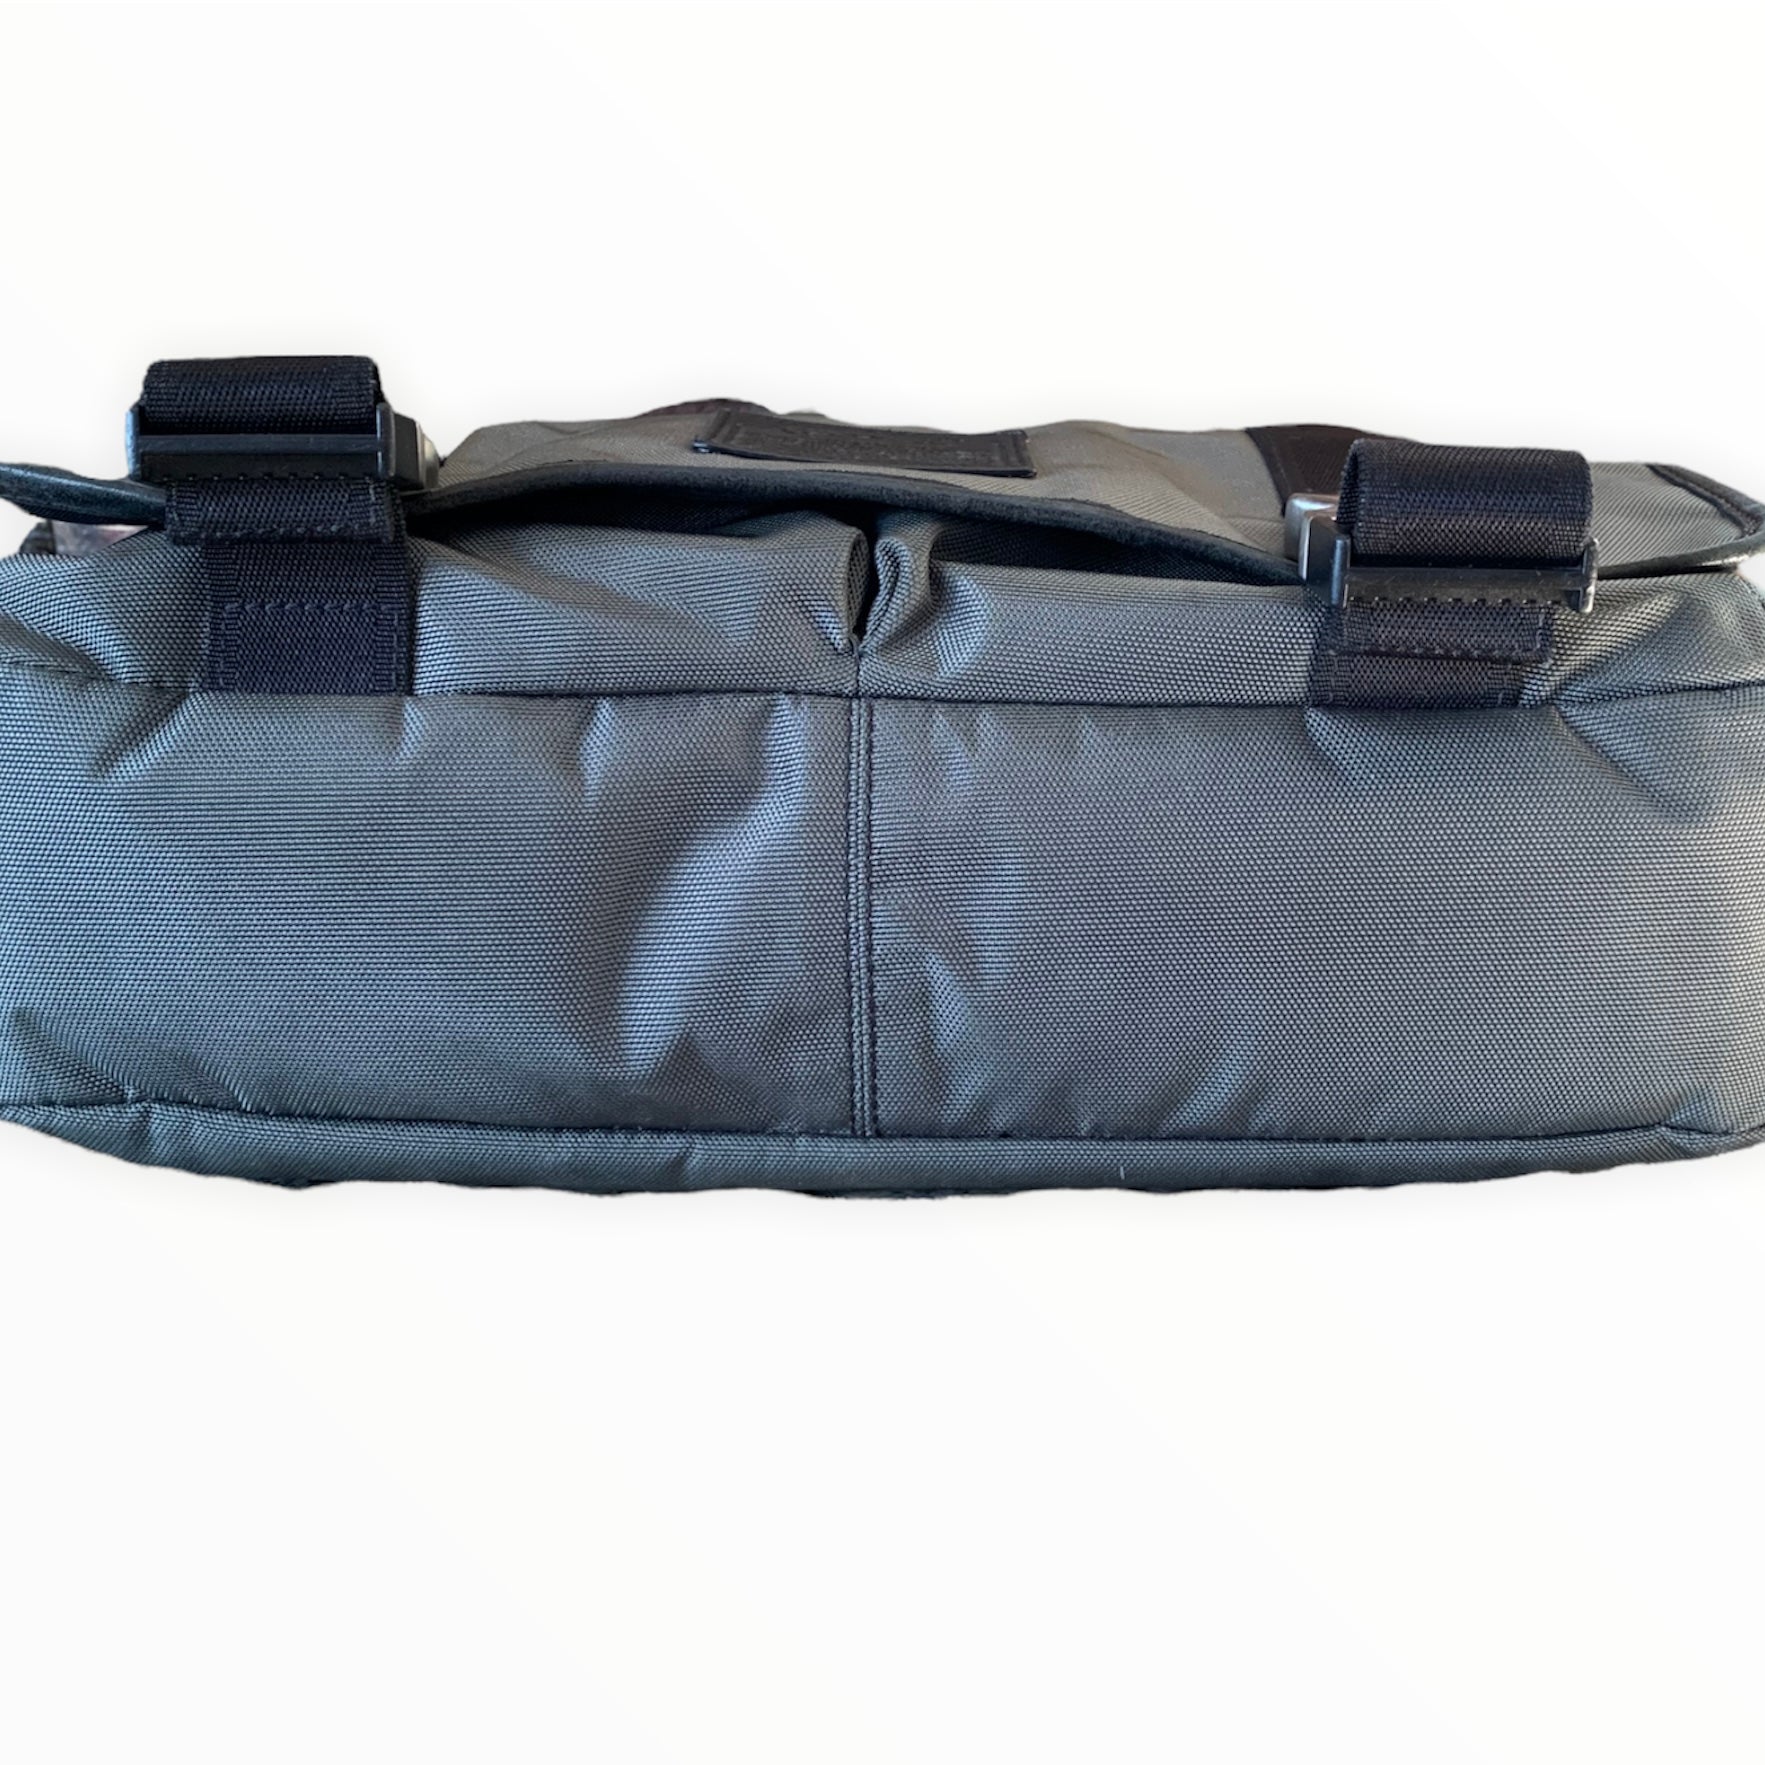 Voyager Leather Messenger Bag At An Affordable Price